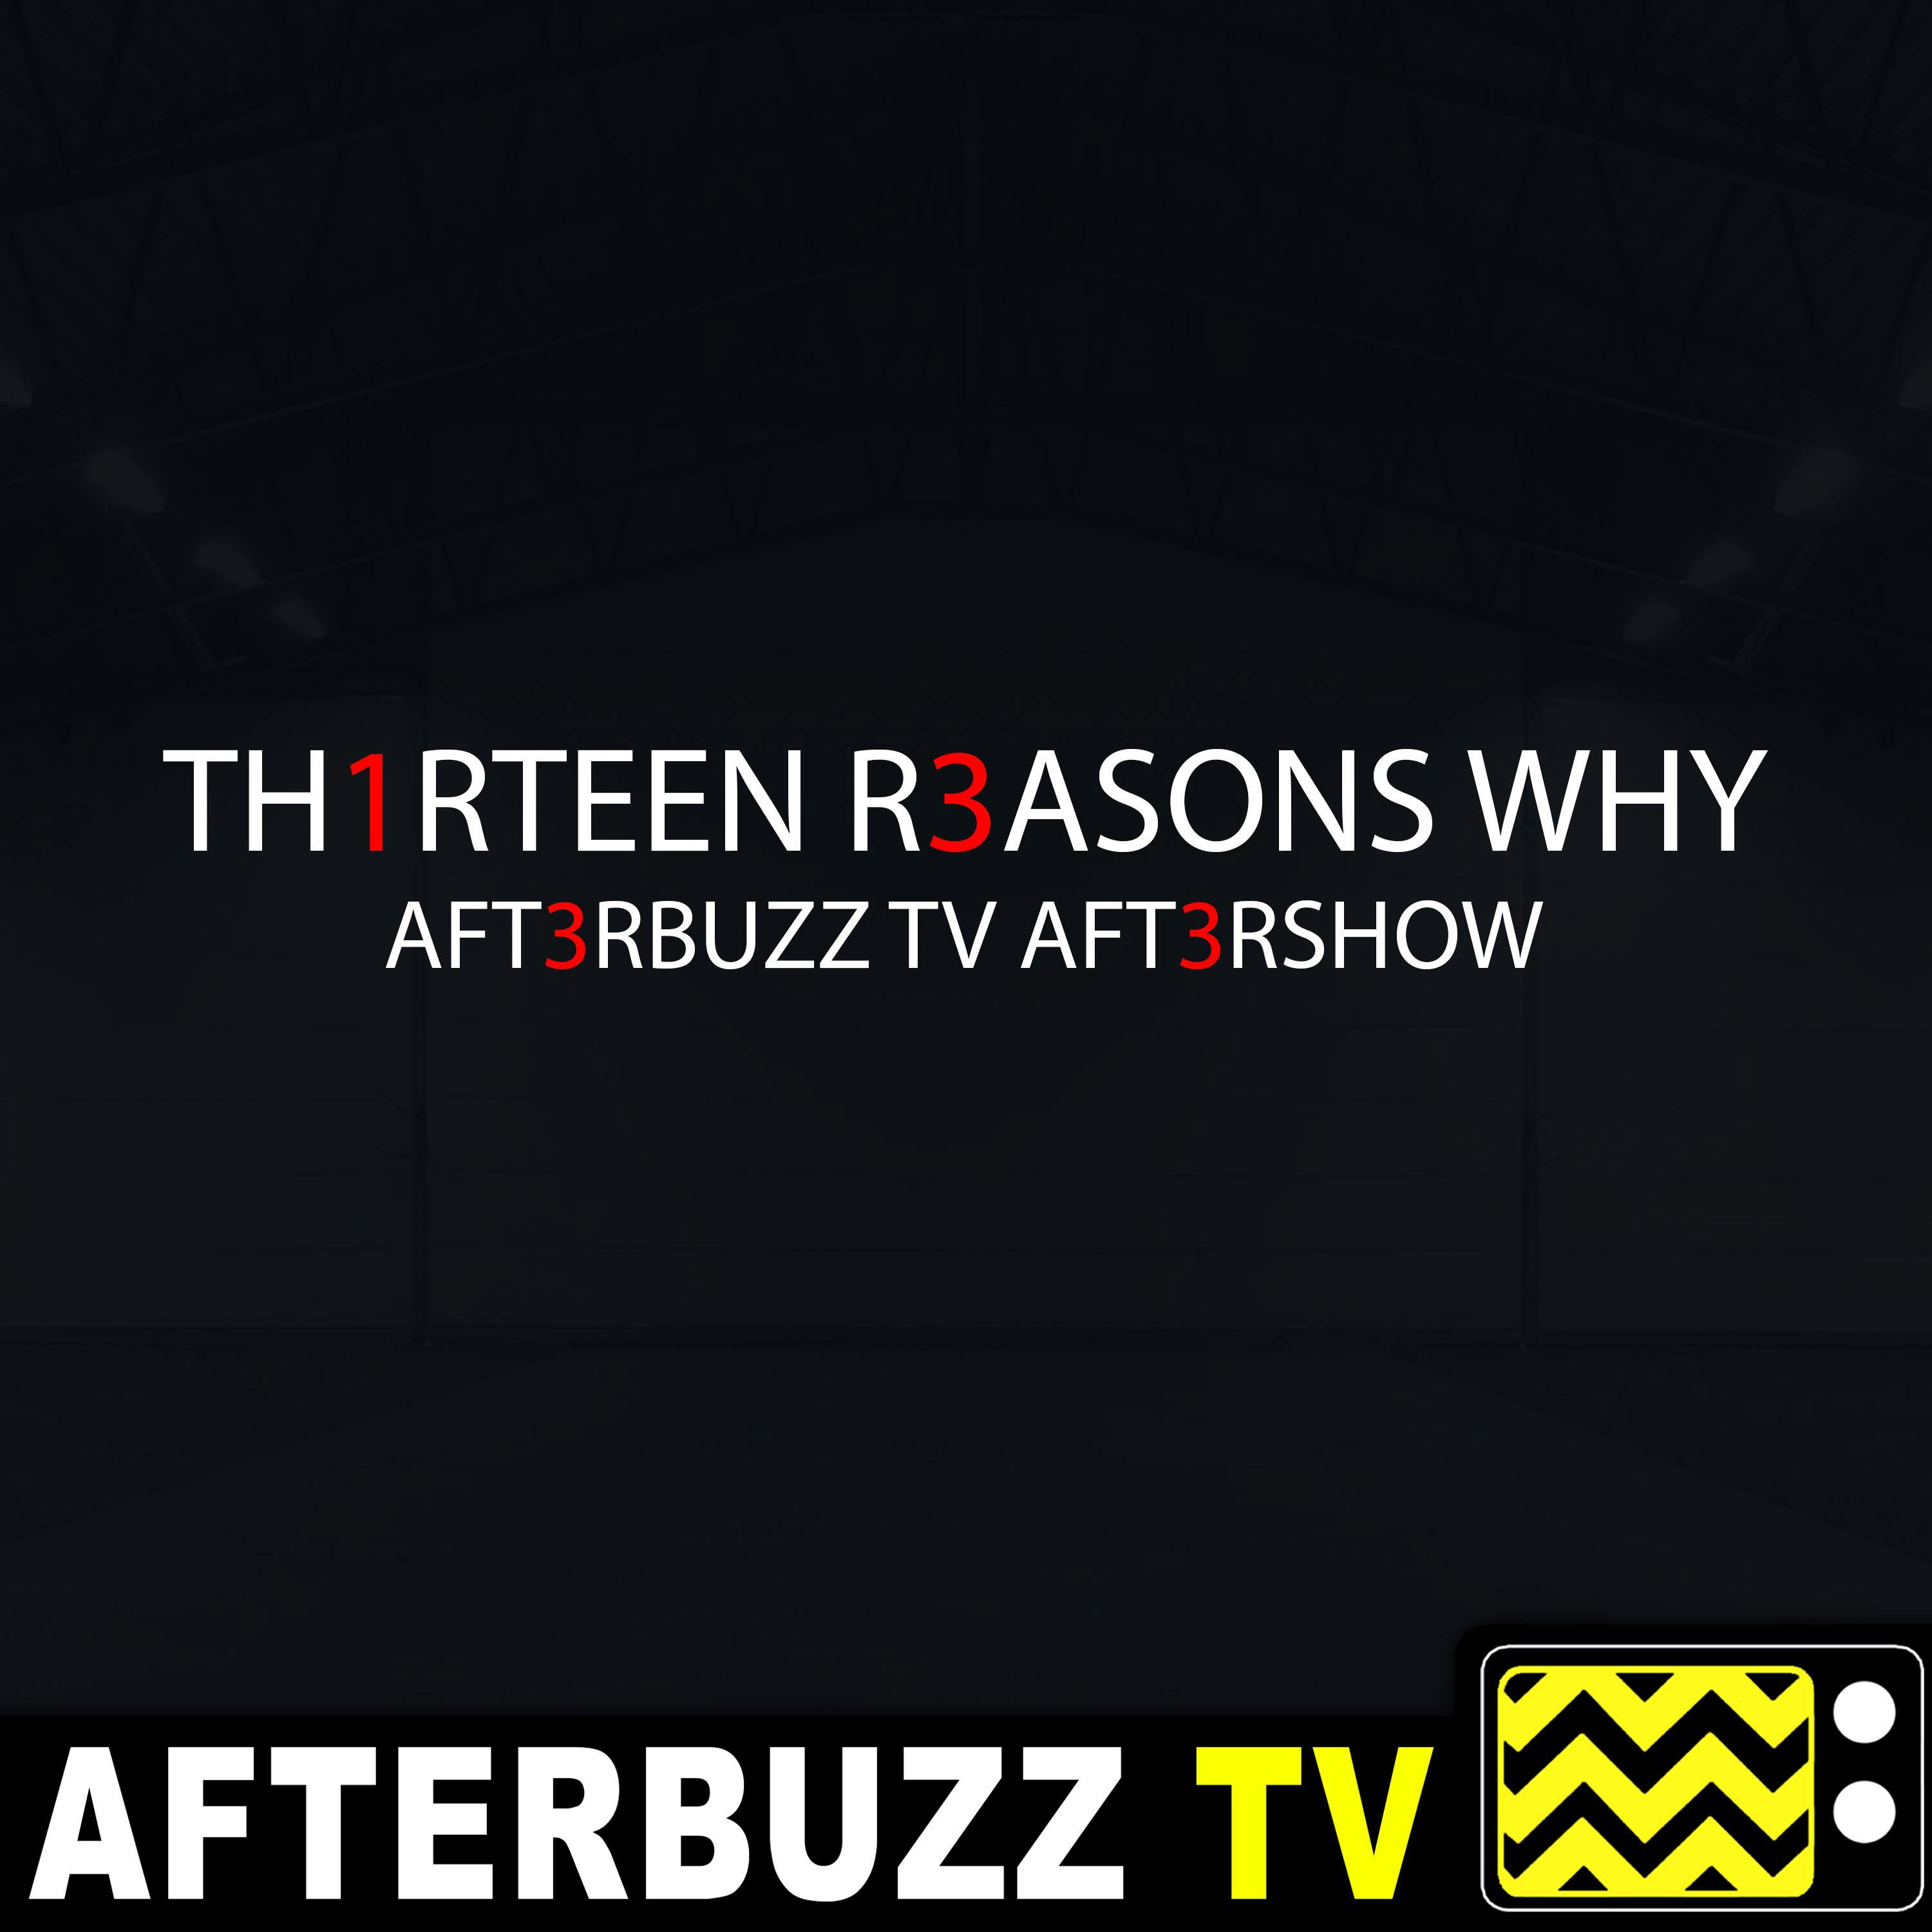 ”Young, Angry and Man” Season 3 Episode 4 ’13 Reasons Why’ Review